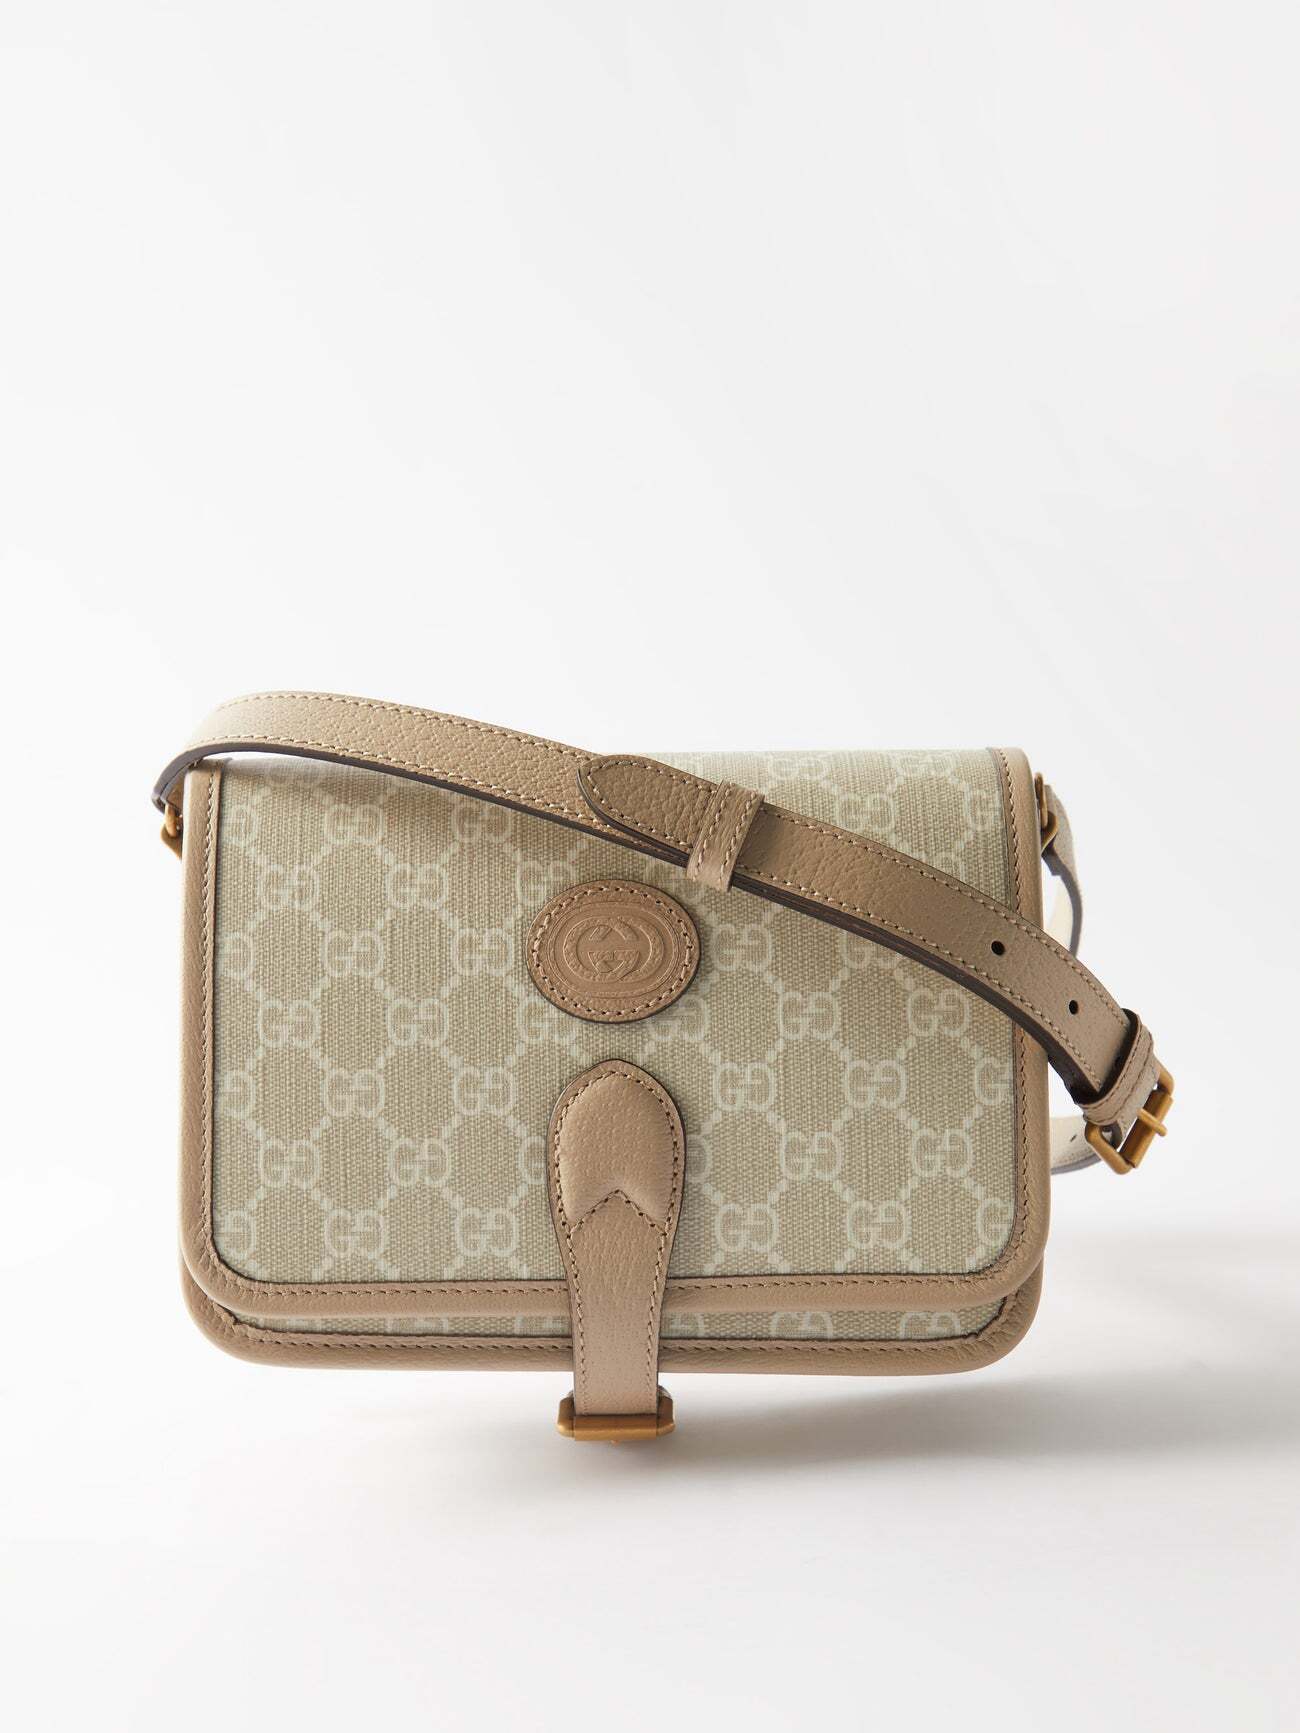 Gucci - GG-supreme Canvas And Leather Shoulder Bag - Womens - Cream